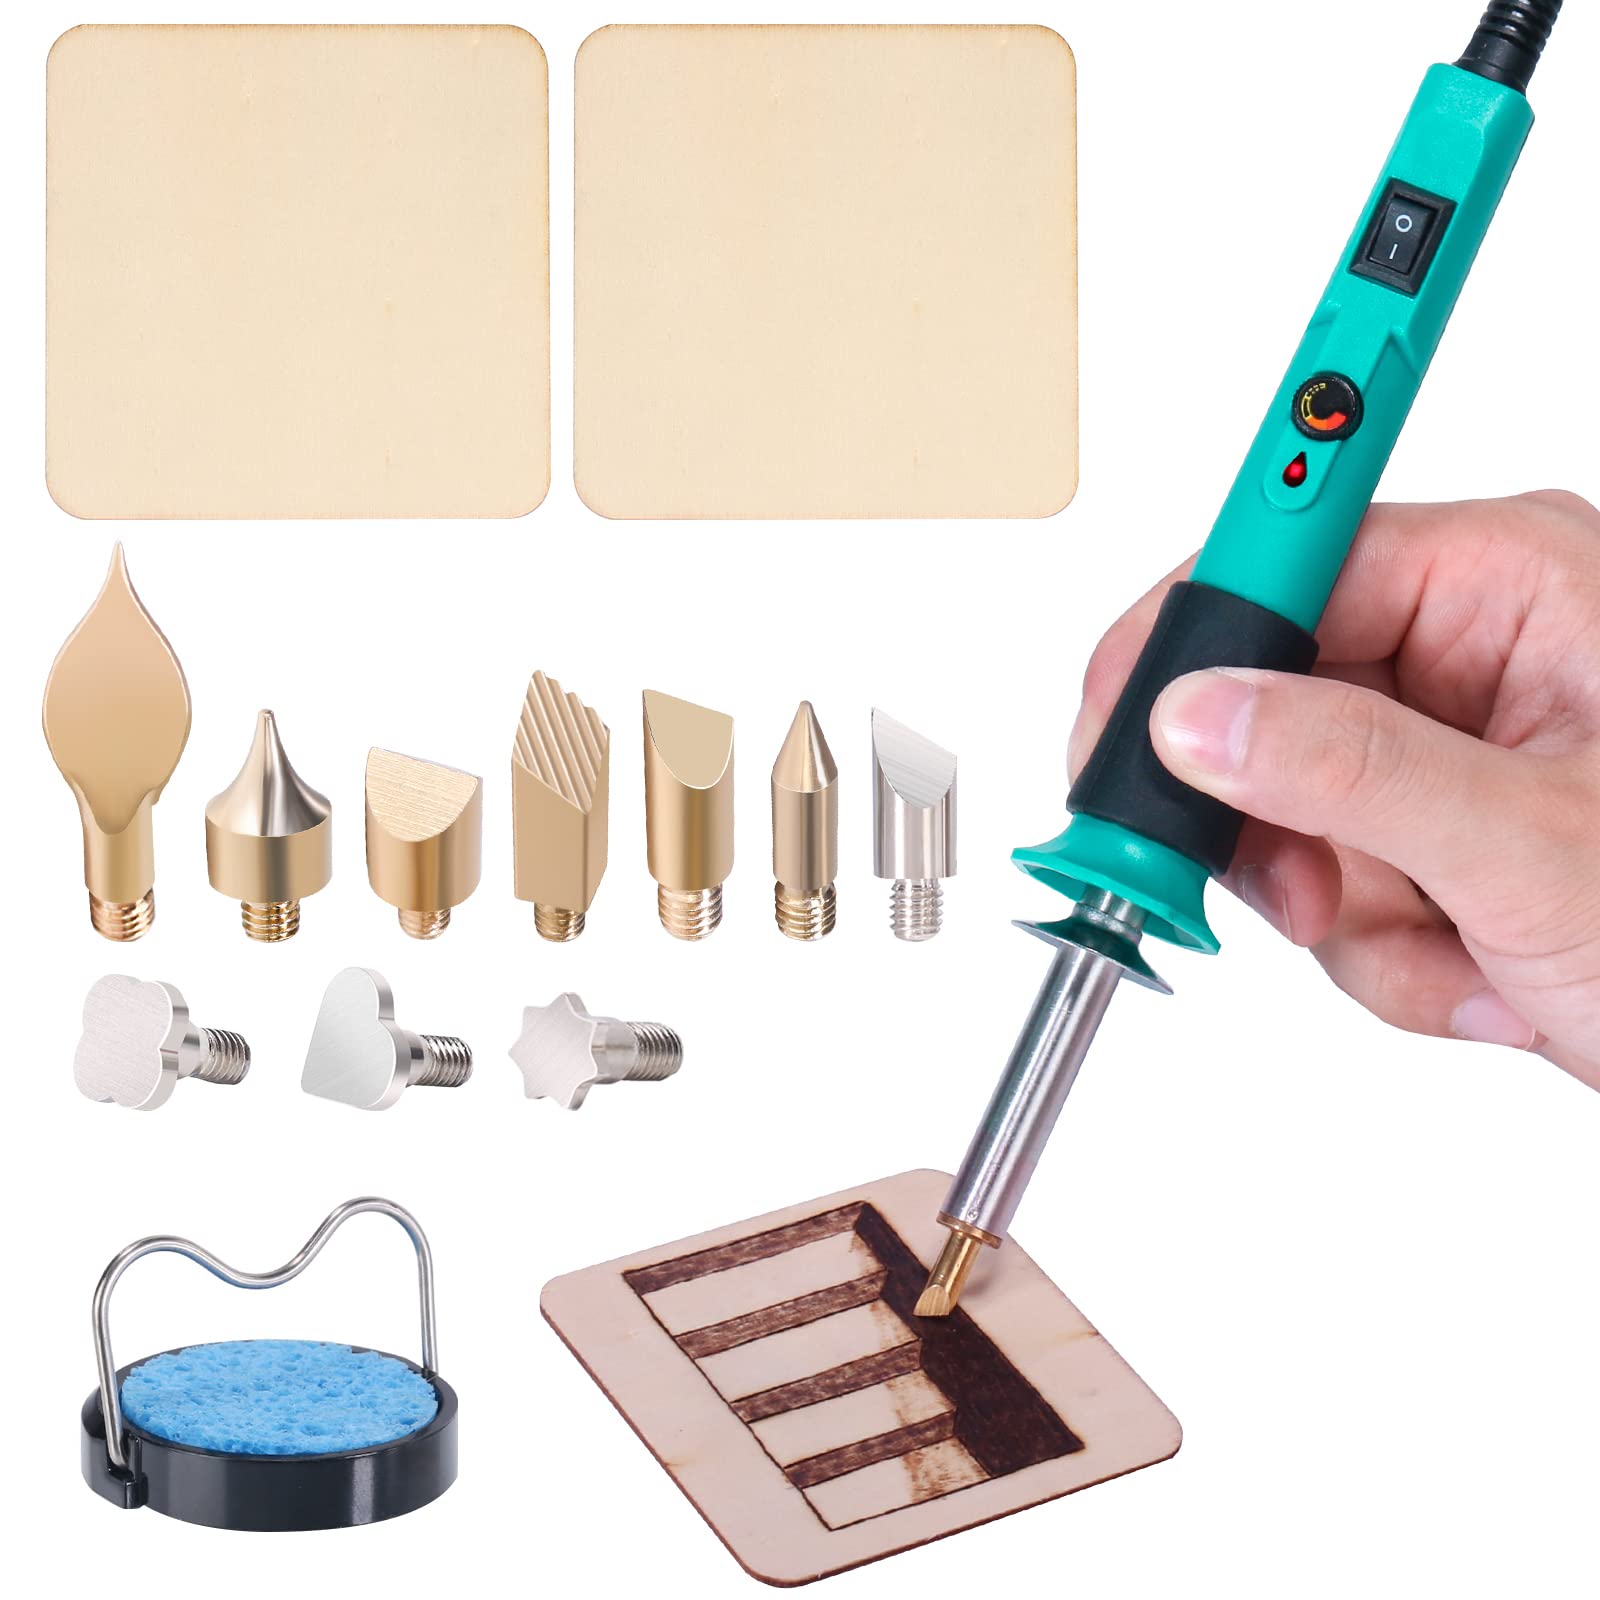  Wood Burning Kit,Wood Burning Tool,Digitally Adjustable  Temperature Wood Burner Kit,Professional Wood Burner Tool Kit for Adults  Beginners Craft,pyrography pen Comes With 10Pyrography Wire Tips : Arts,  Crafts & Sewing